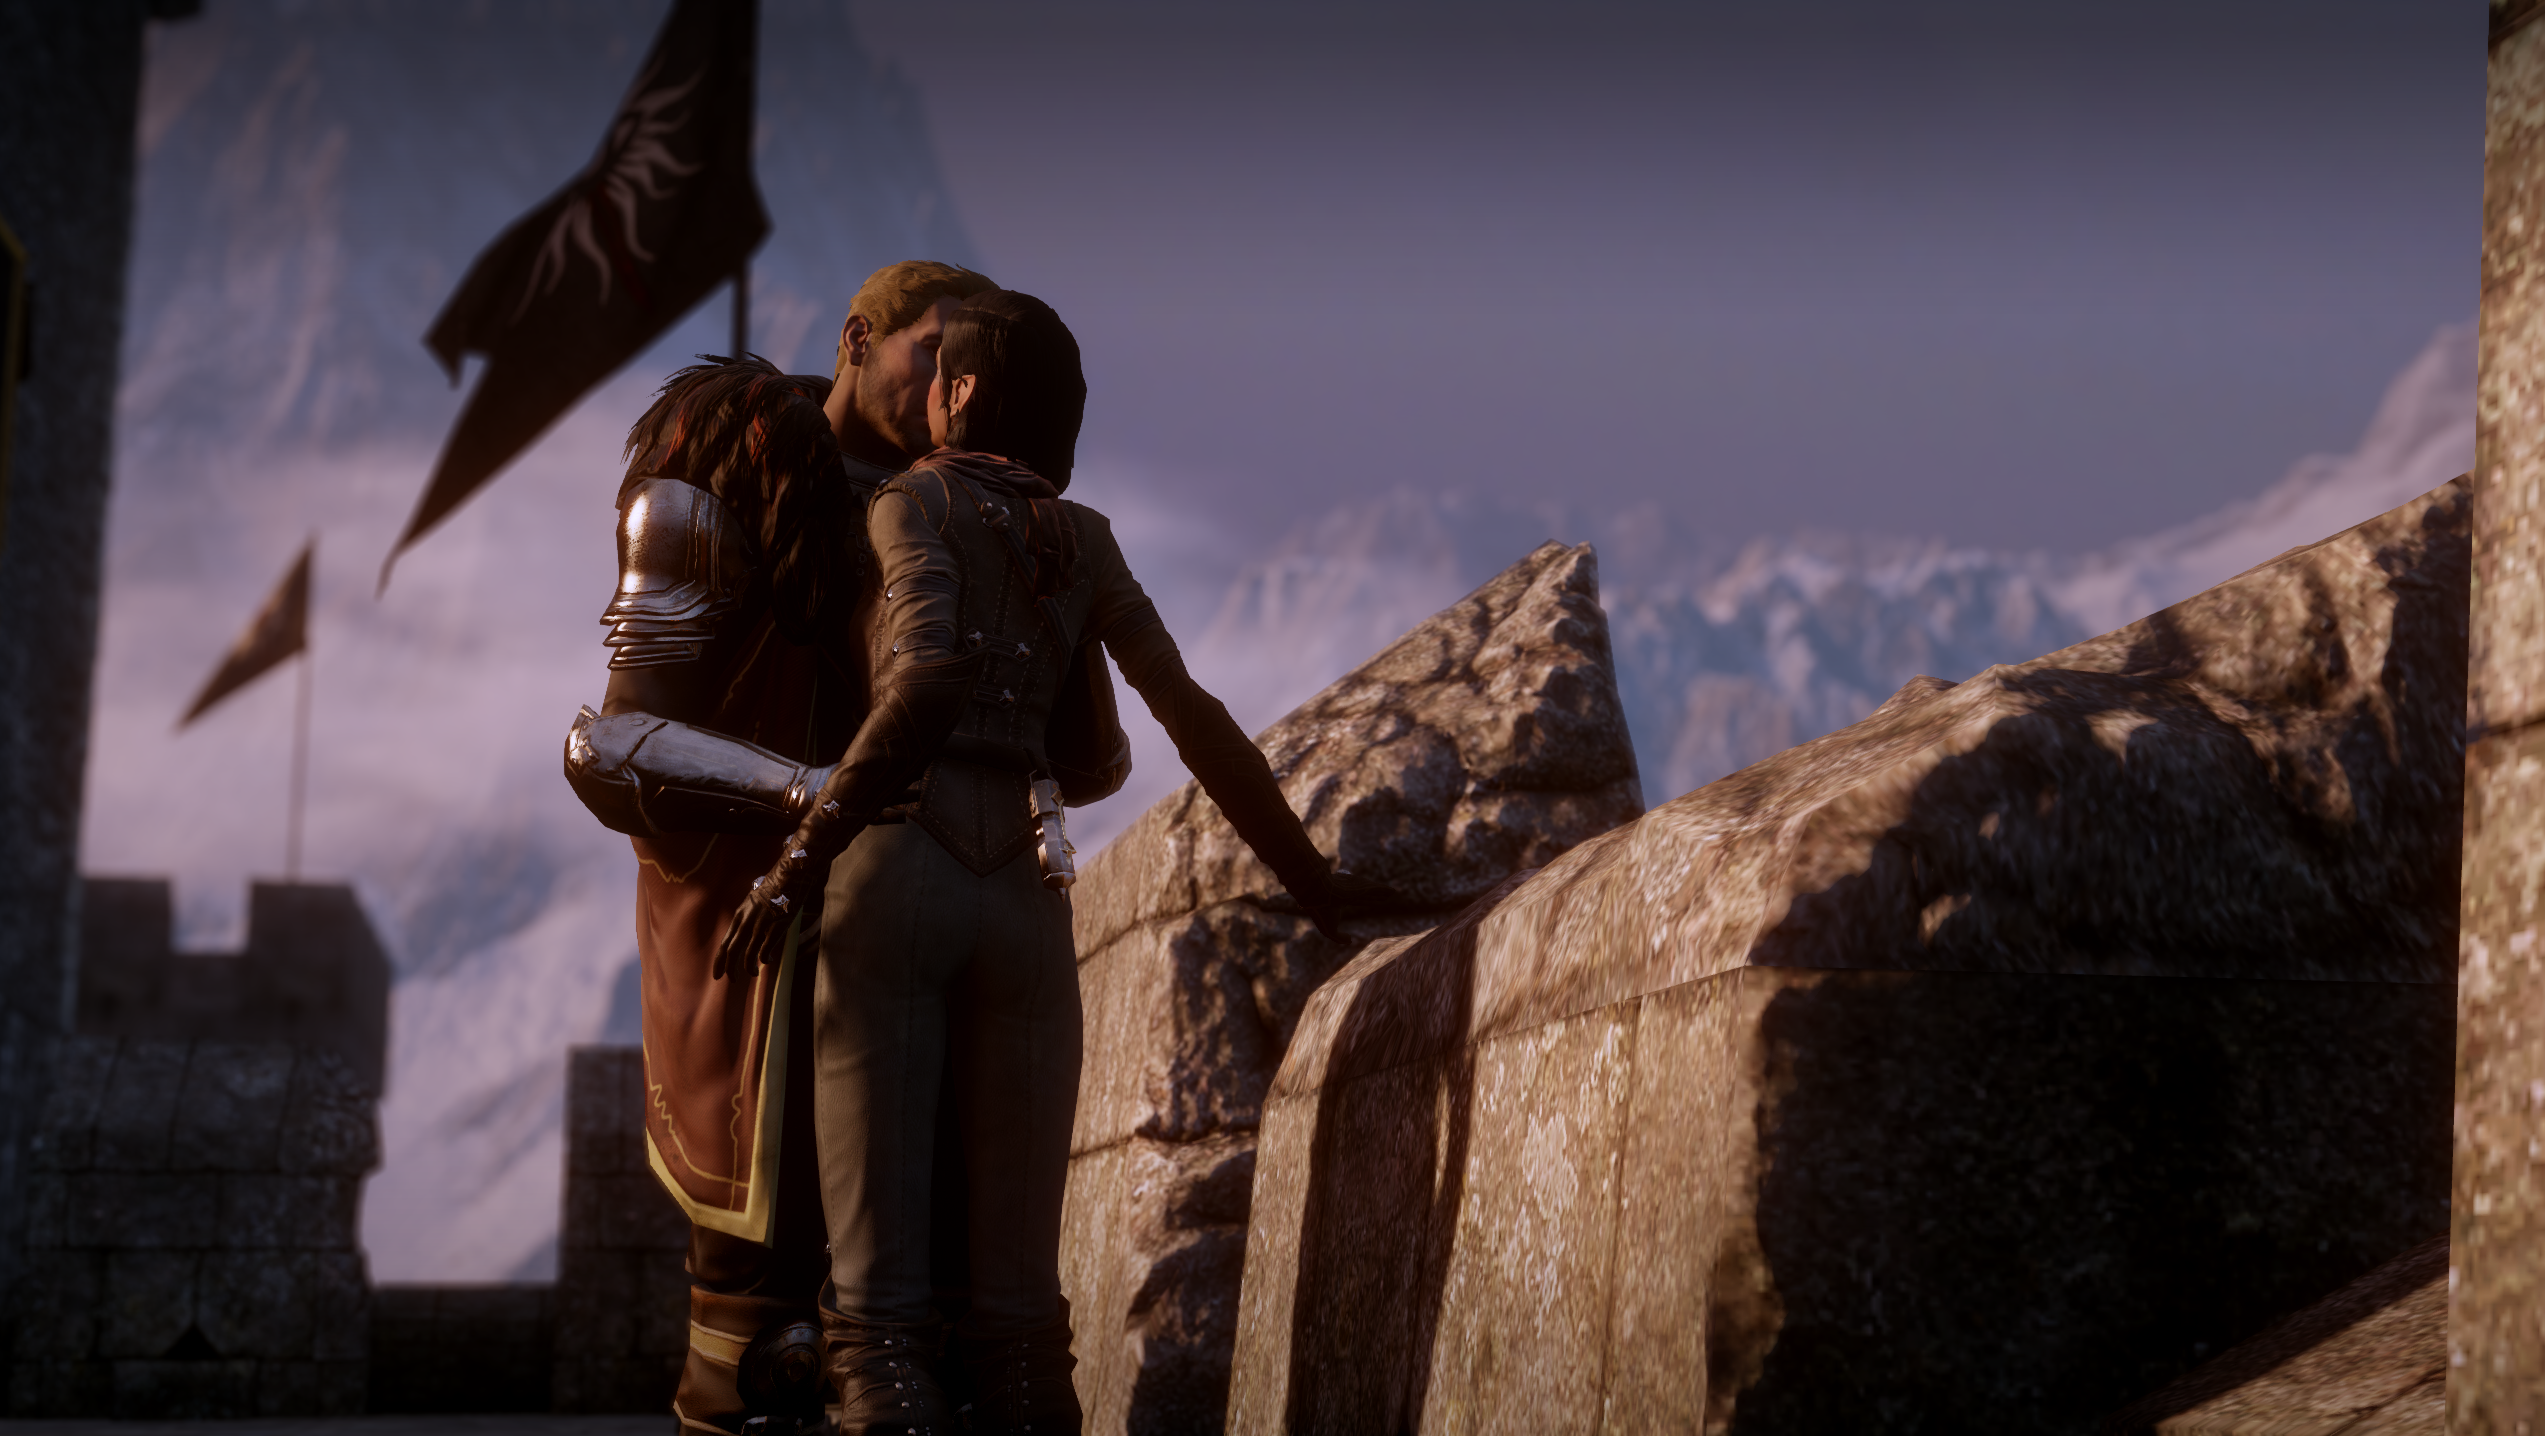 Dragon Age Dragon Age Inquisition Dragon Age Inquisition Inquisitor Couple Cullen Rutherford Kissing 2545x1436